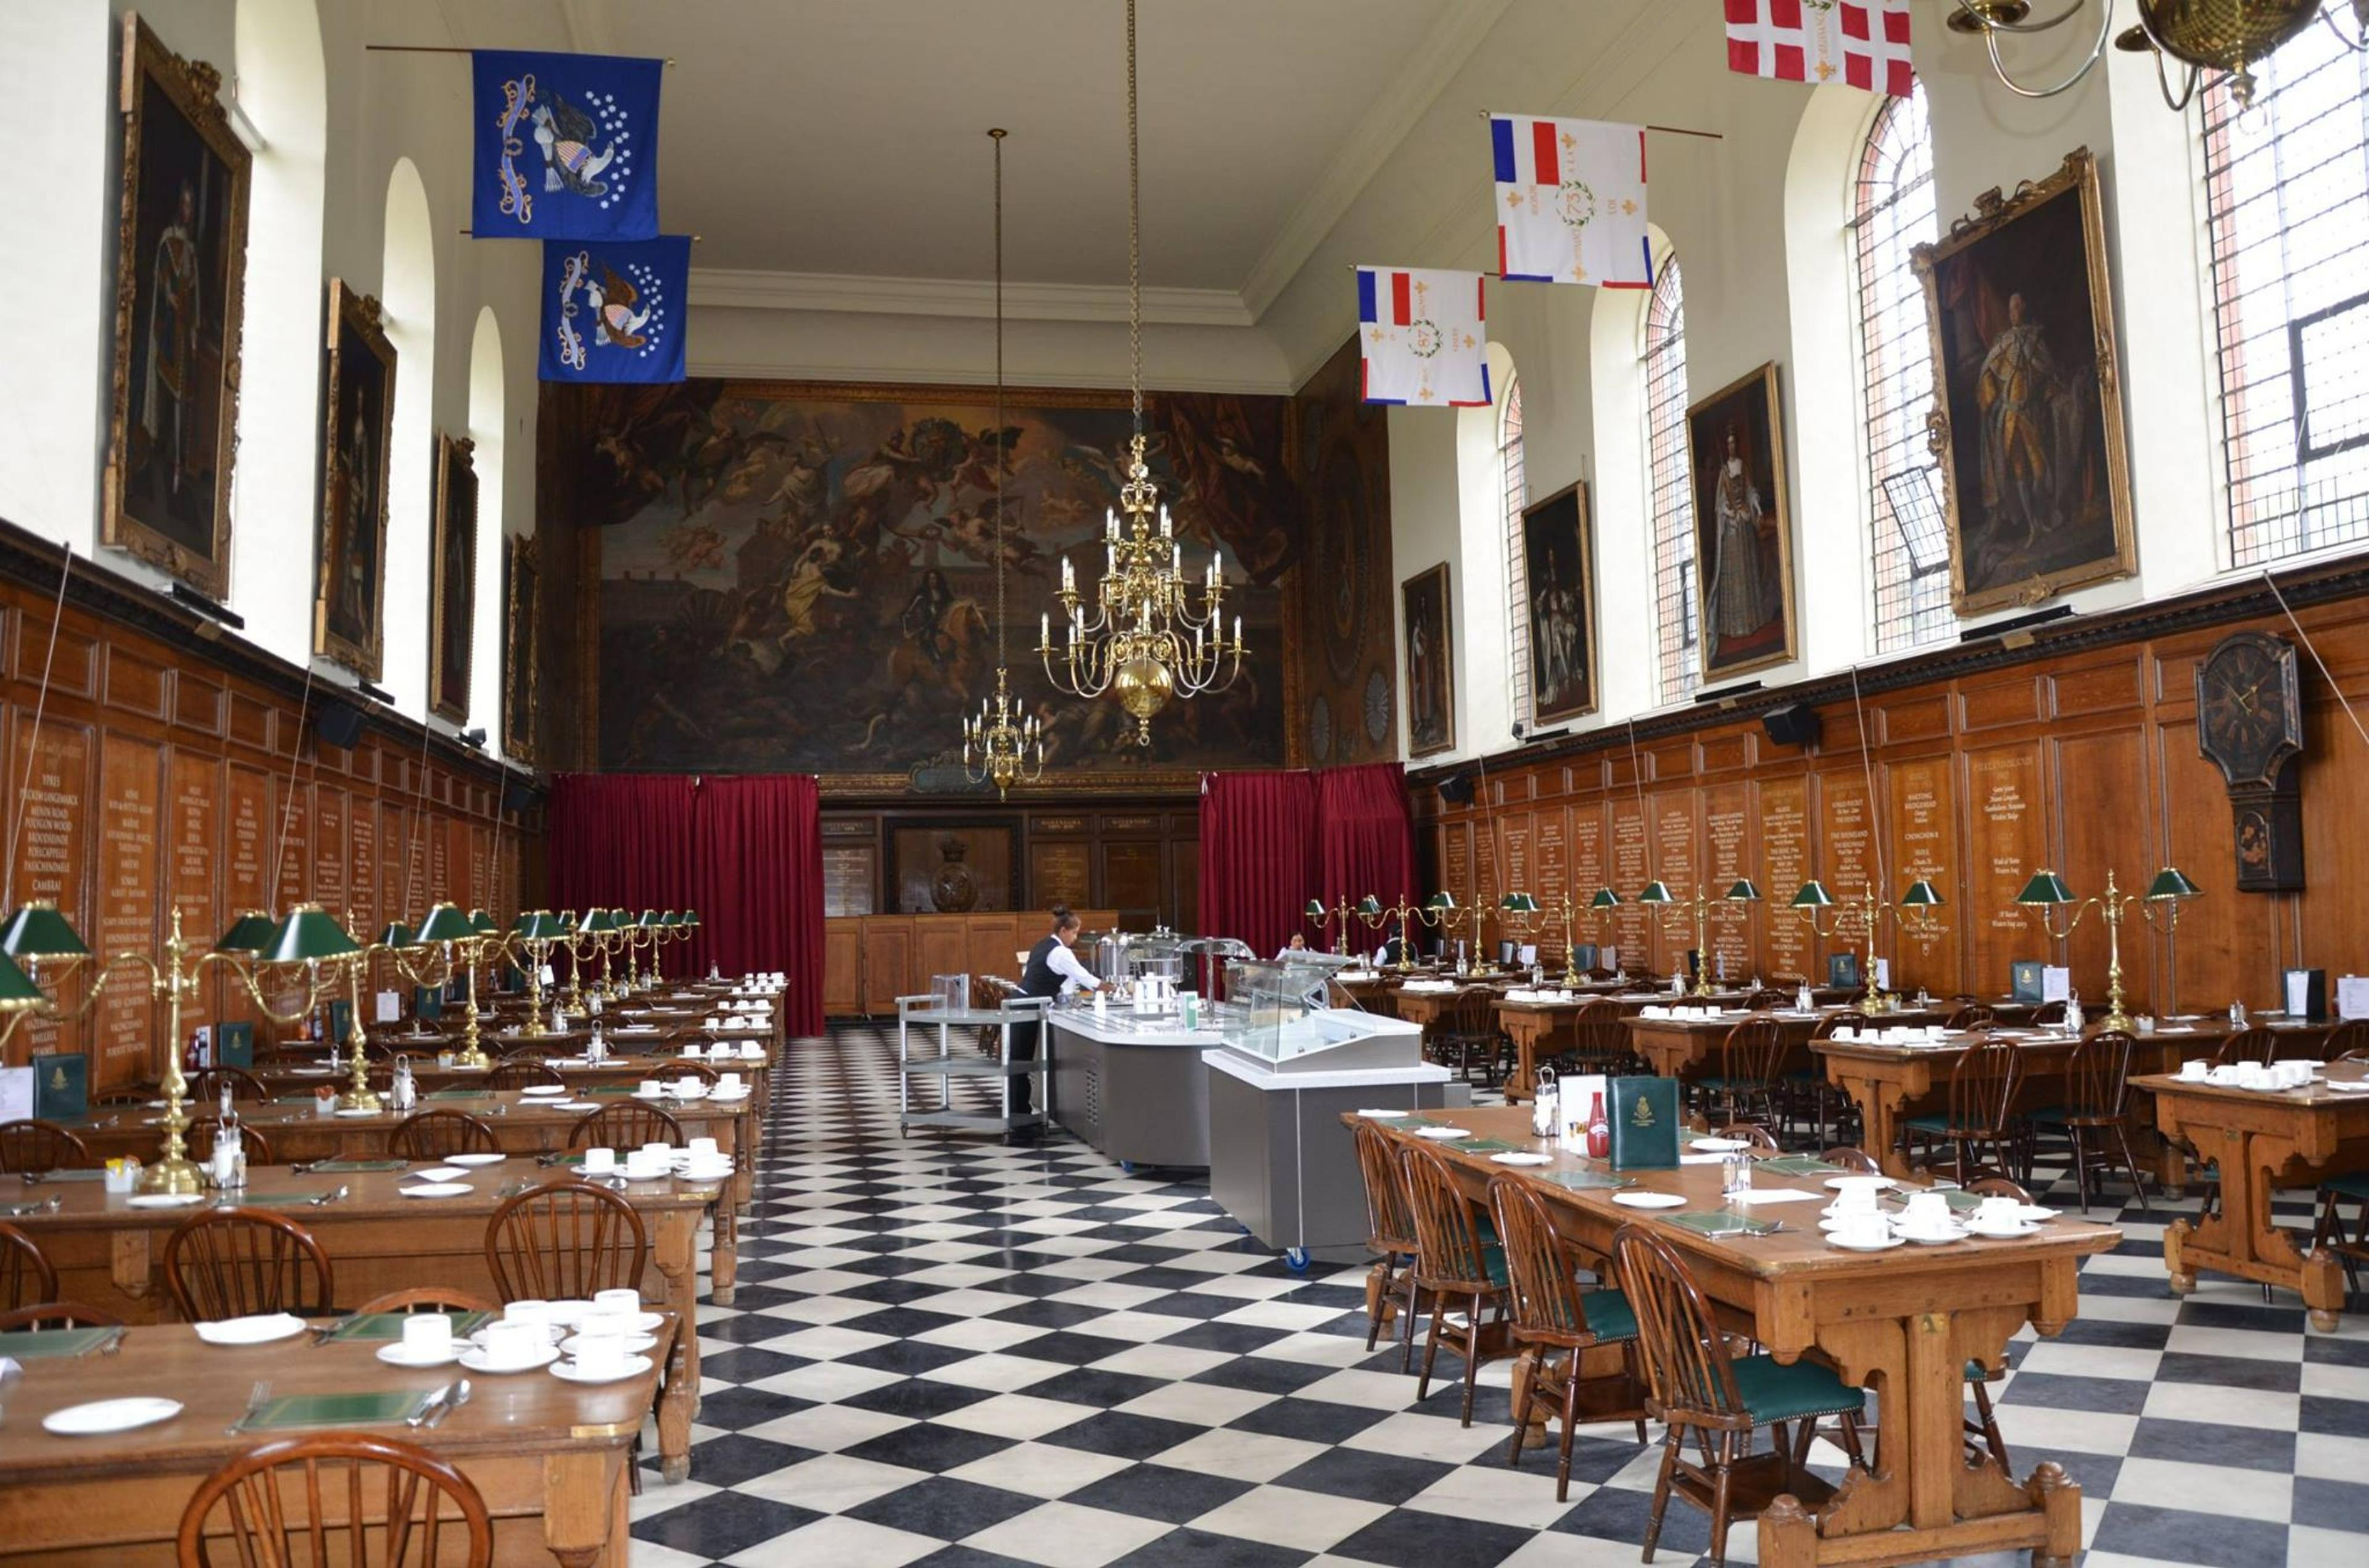 Great Hall of the Royal Hospital Chelsea